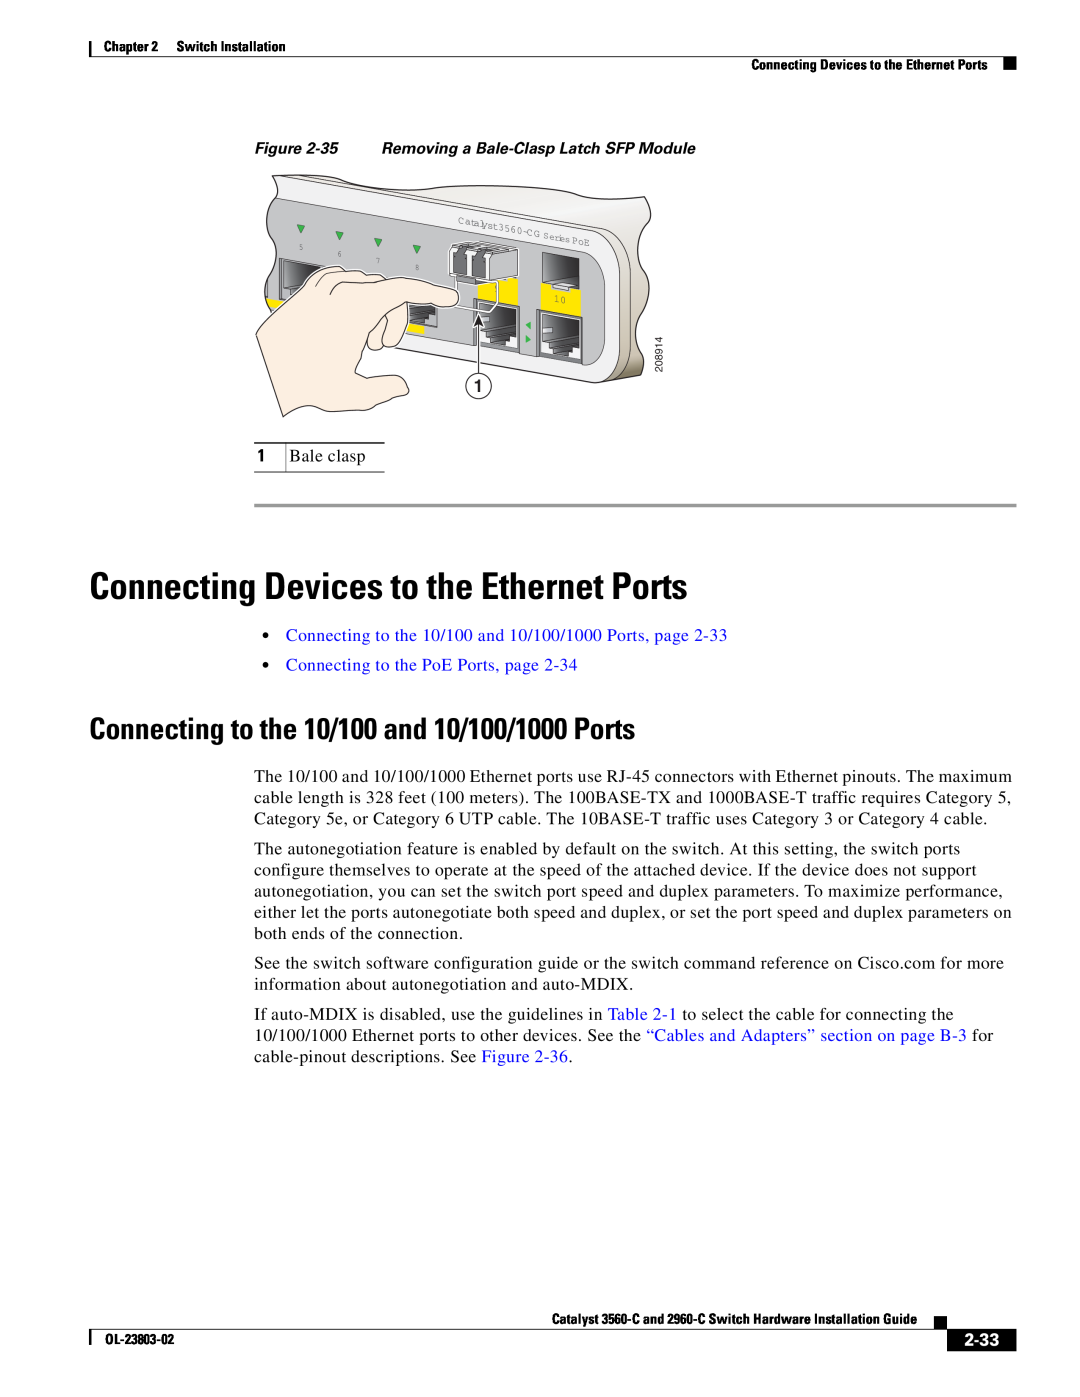 Cisco Systems 3560-C manual Connecting Devices to the Ethernet Ports, Connecting to the 10/100 and 10/100/1000 Ports, 2-33 